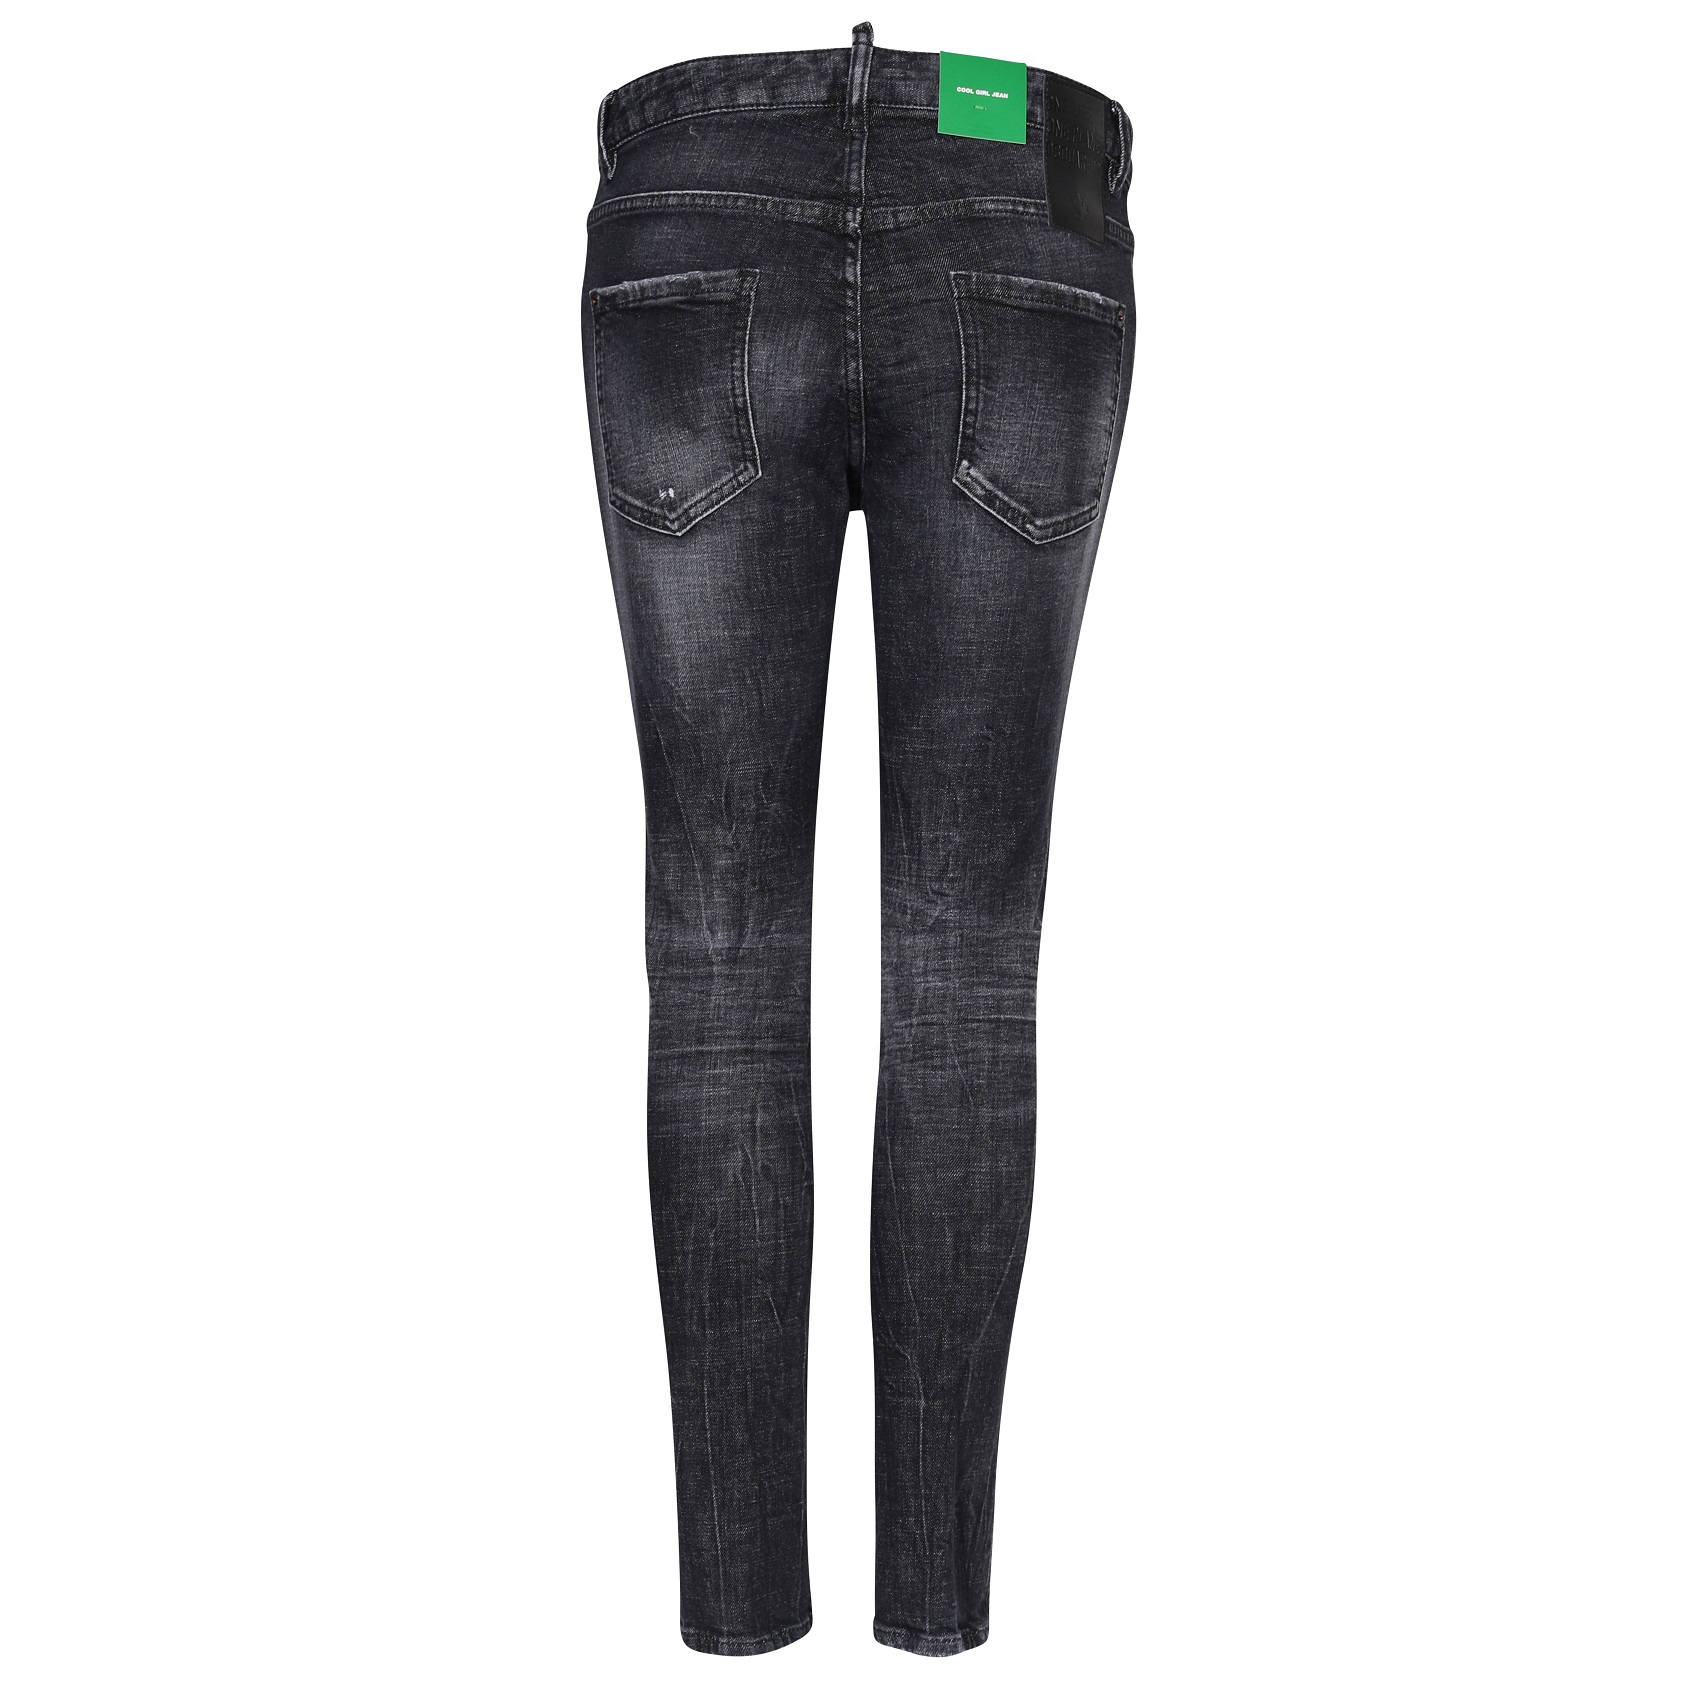 DSQUARED2 Jeans Cool Girl Green Label in Washed Black 40